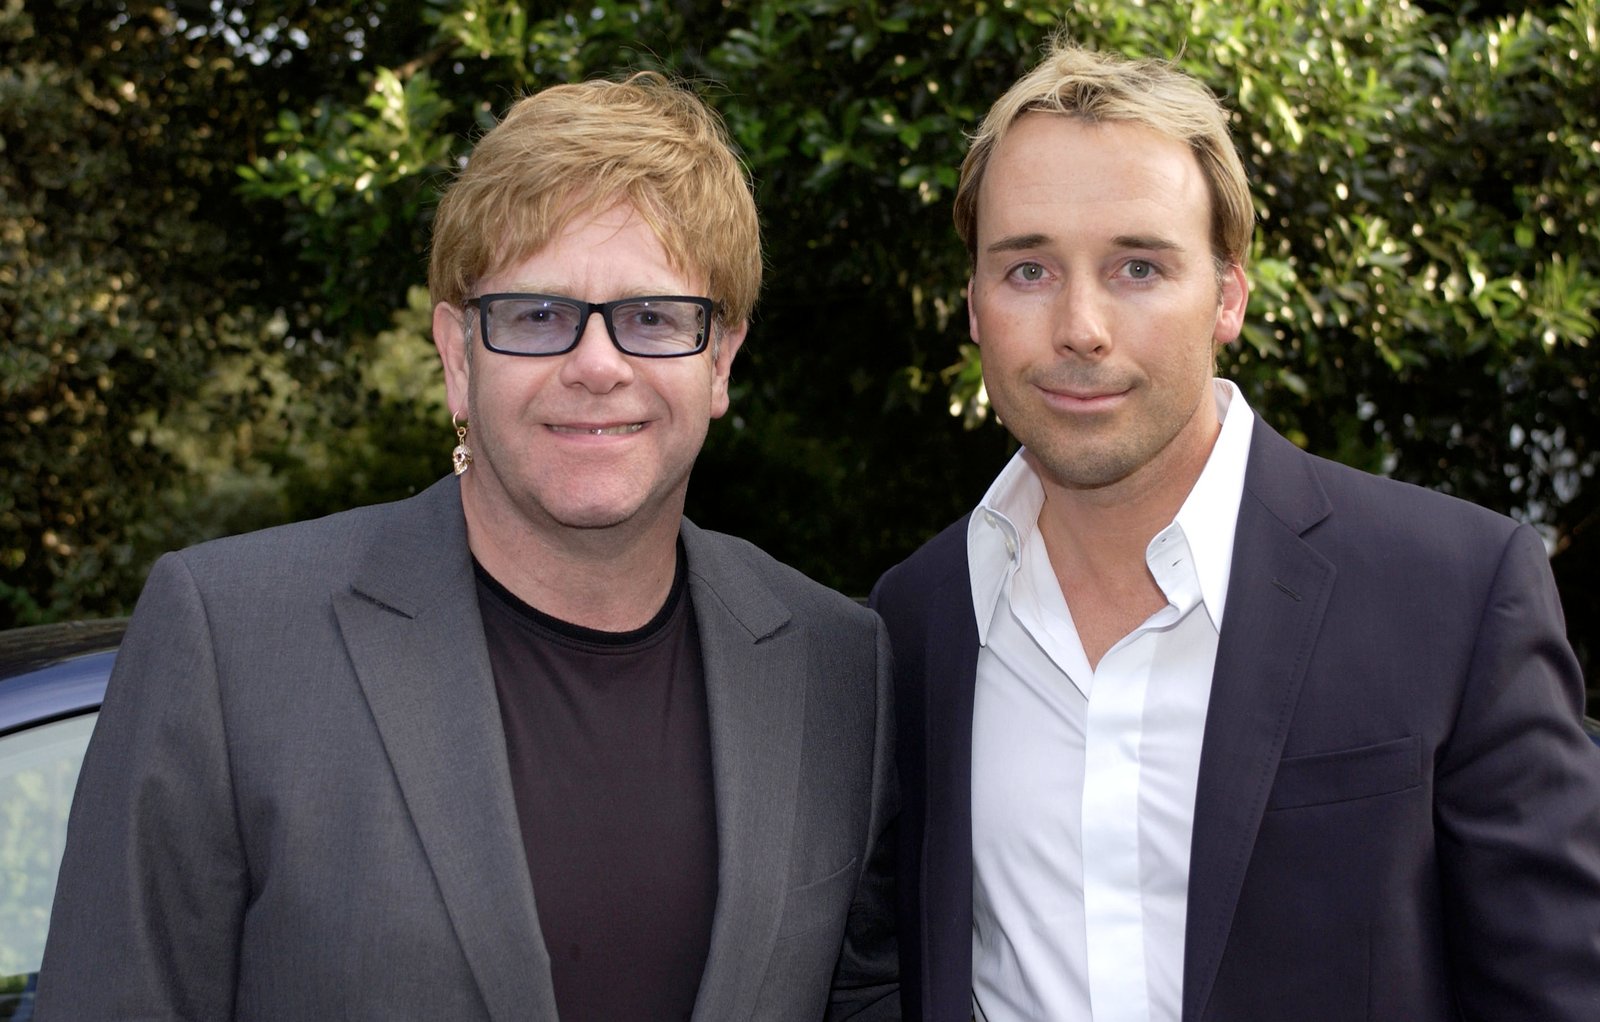 Sir Elton John and David Furnish in London in 2001 | Source: Getty Images